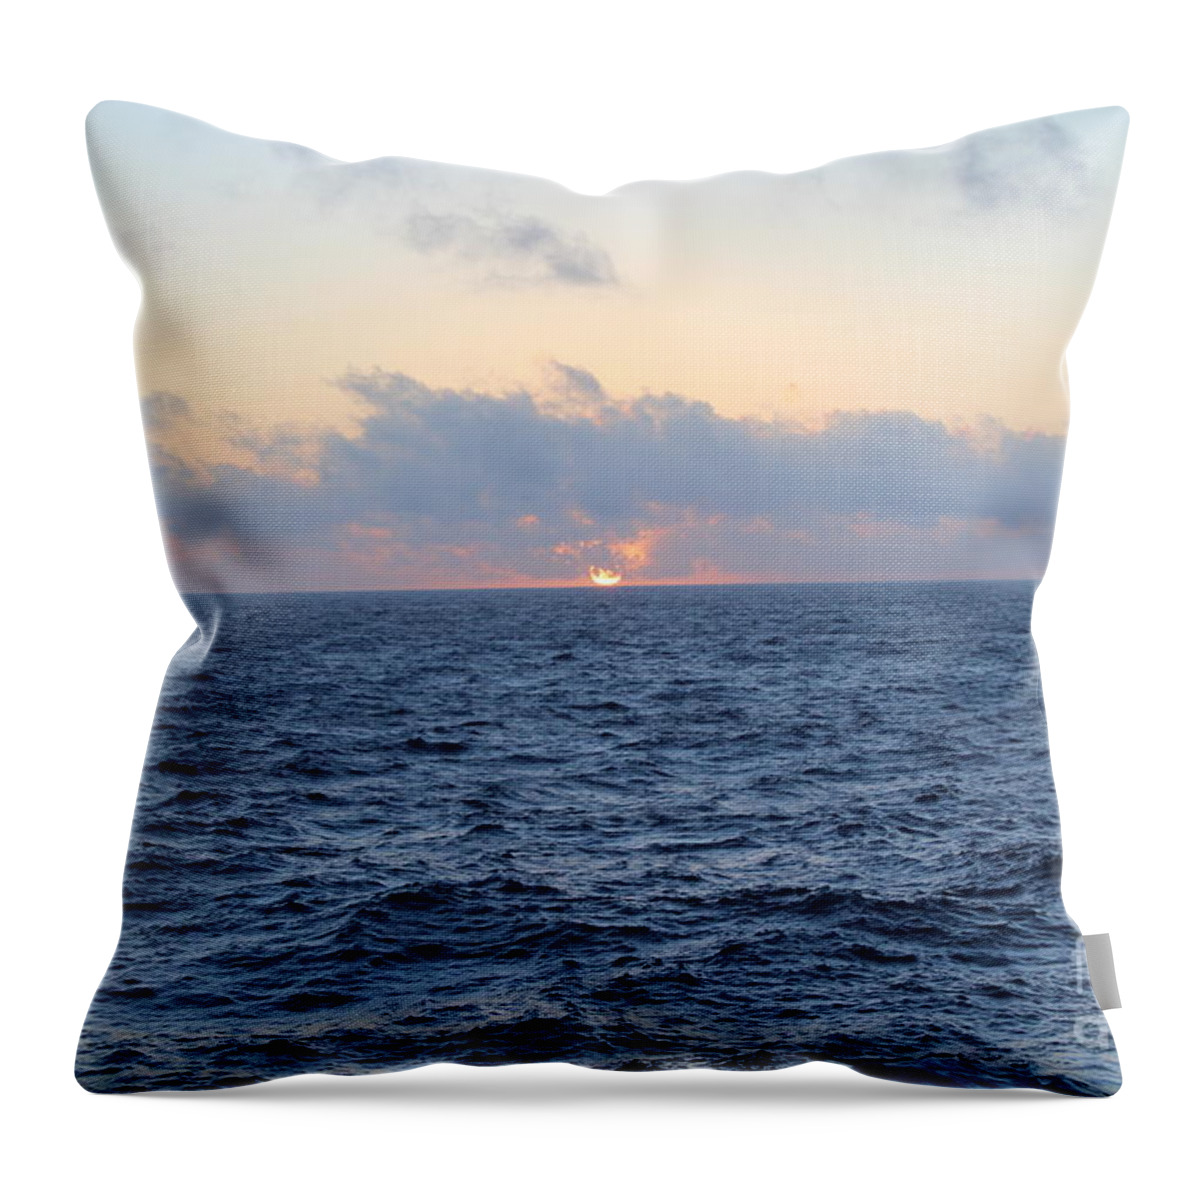 Sunset Over Open Waters Throw Pillow featuring the photograph Sunset Over Open Waters by Barbra Telfer